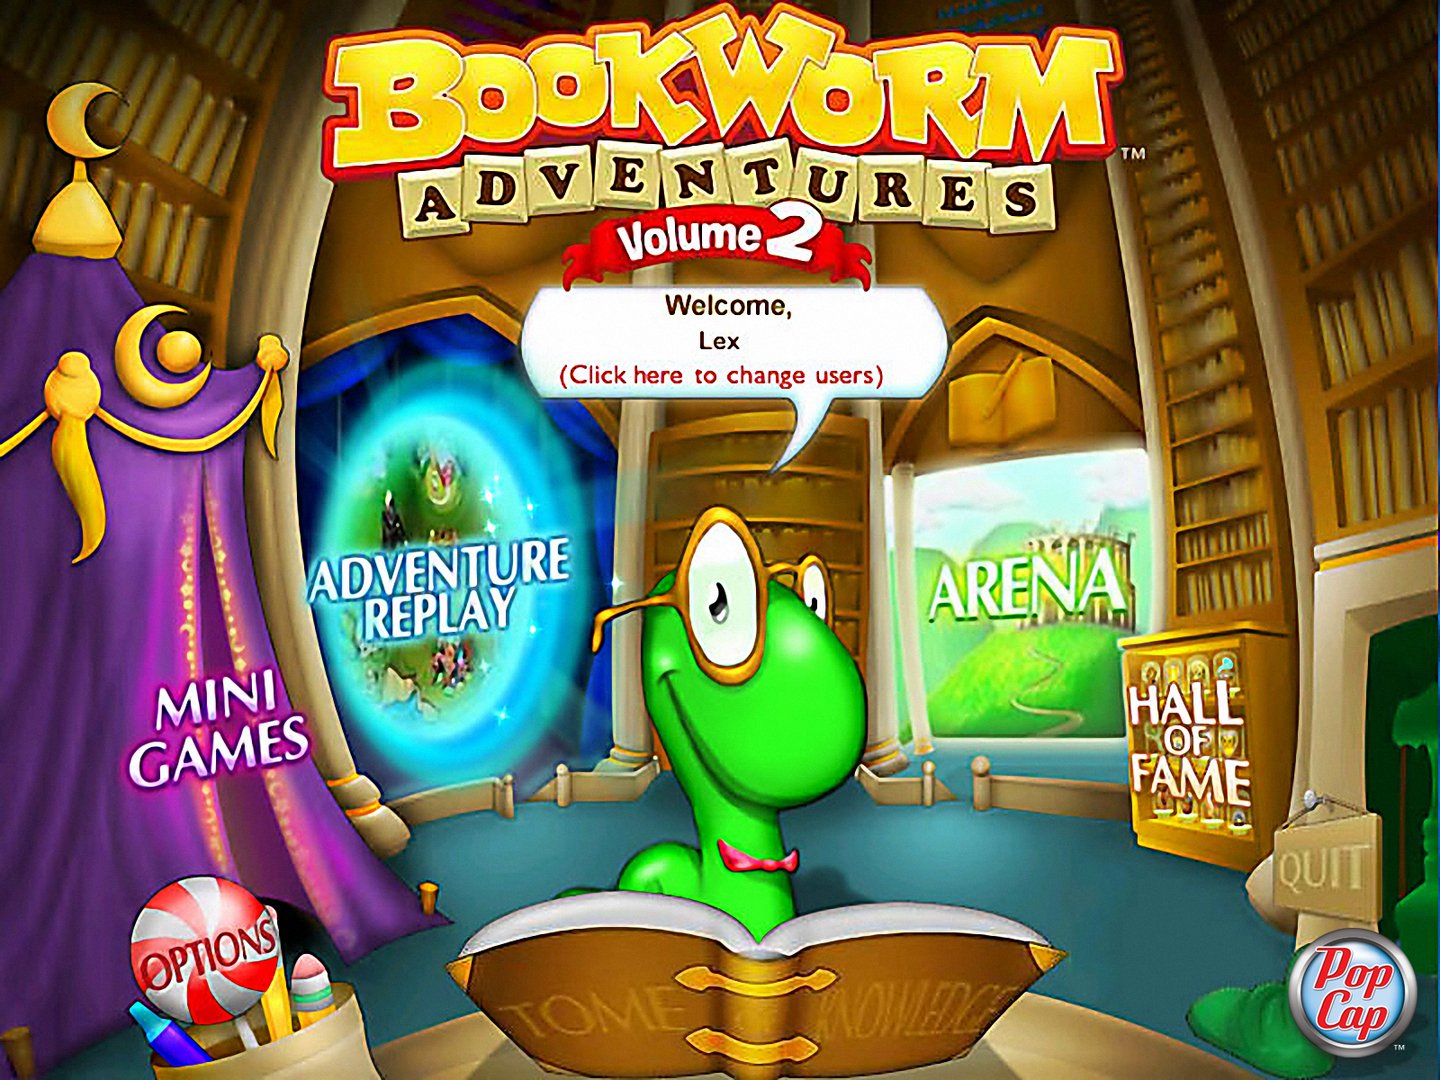 download bookworm game for android